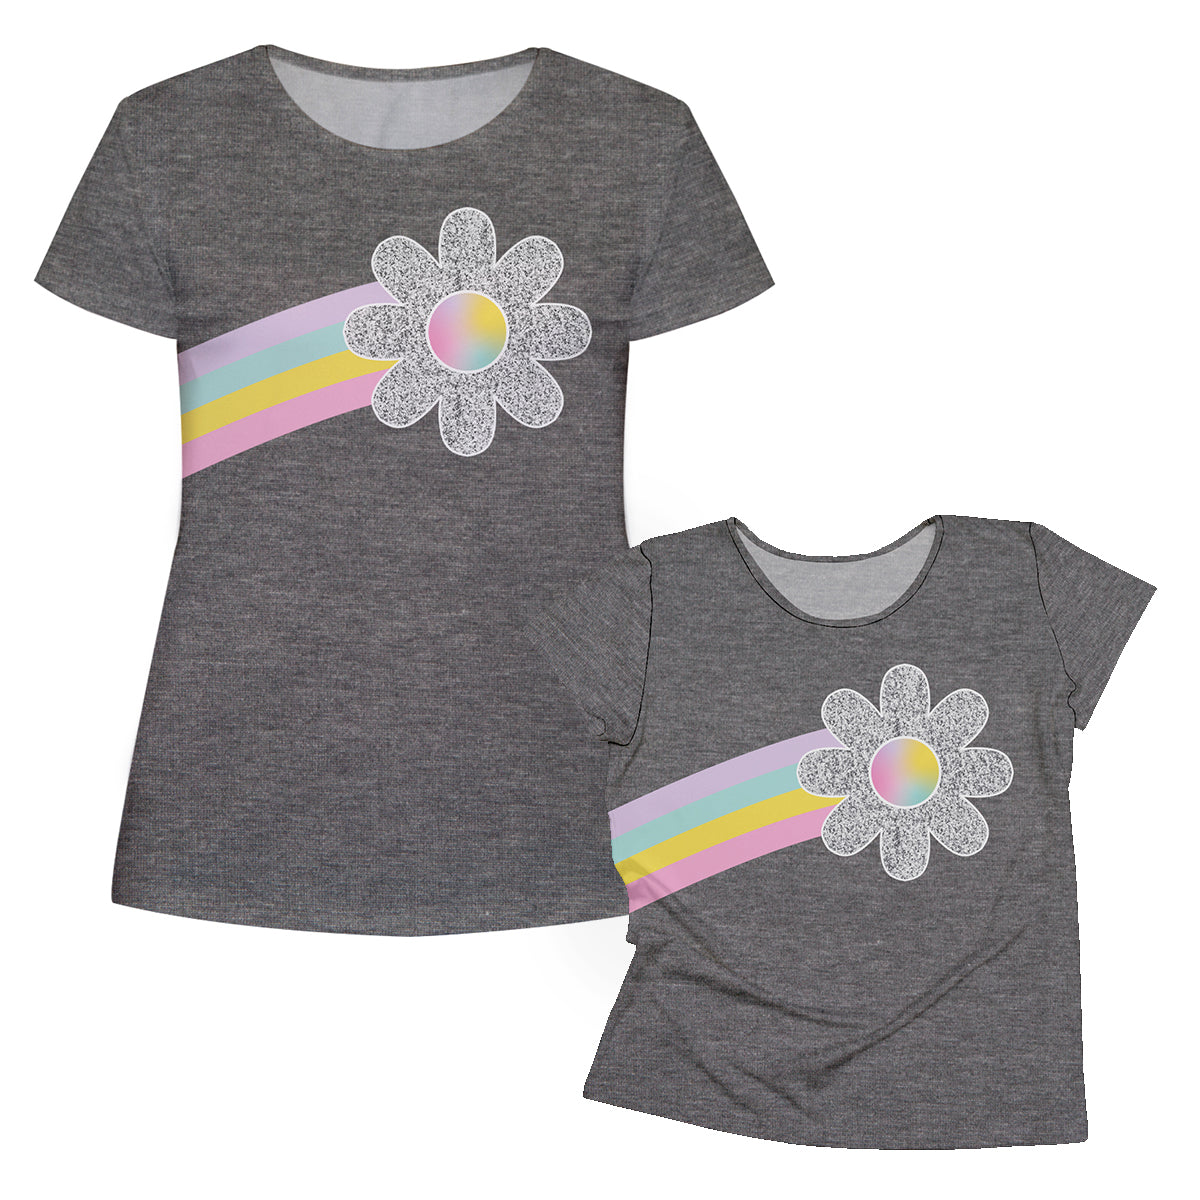 Flower and Rainbow Gray and Yellow Short Sleeve Tee Shirt - Wimziy&Co.